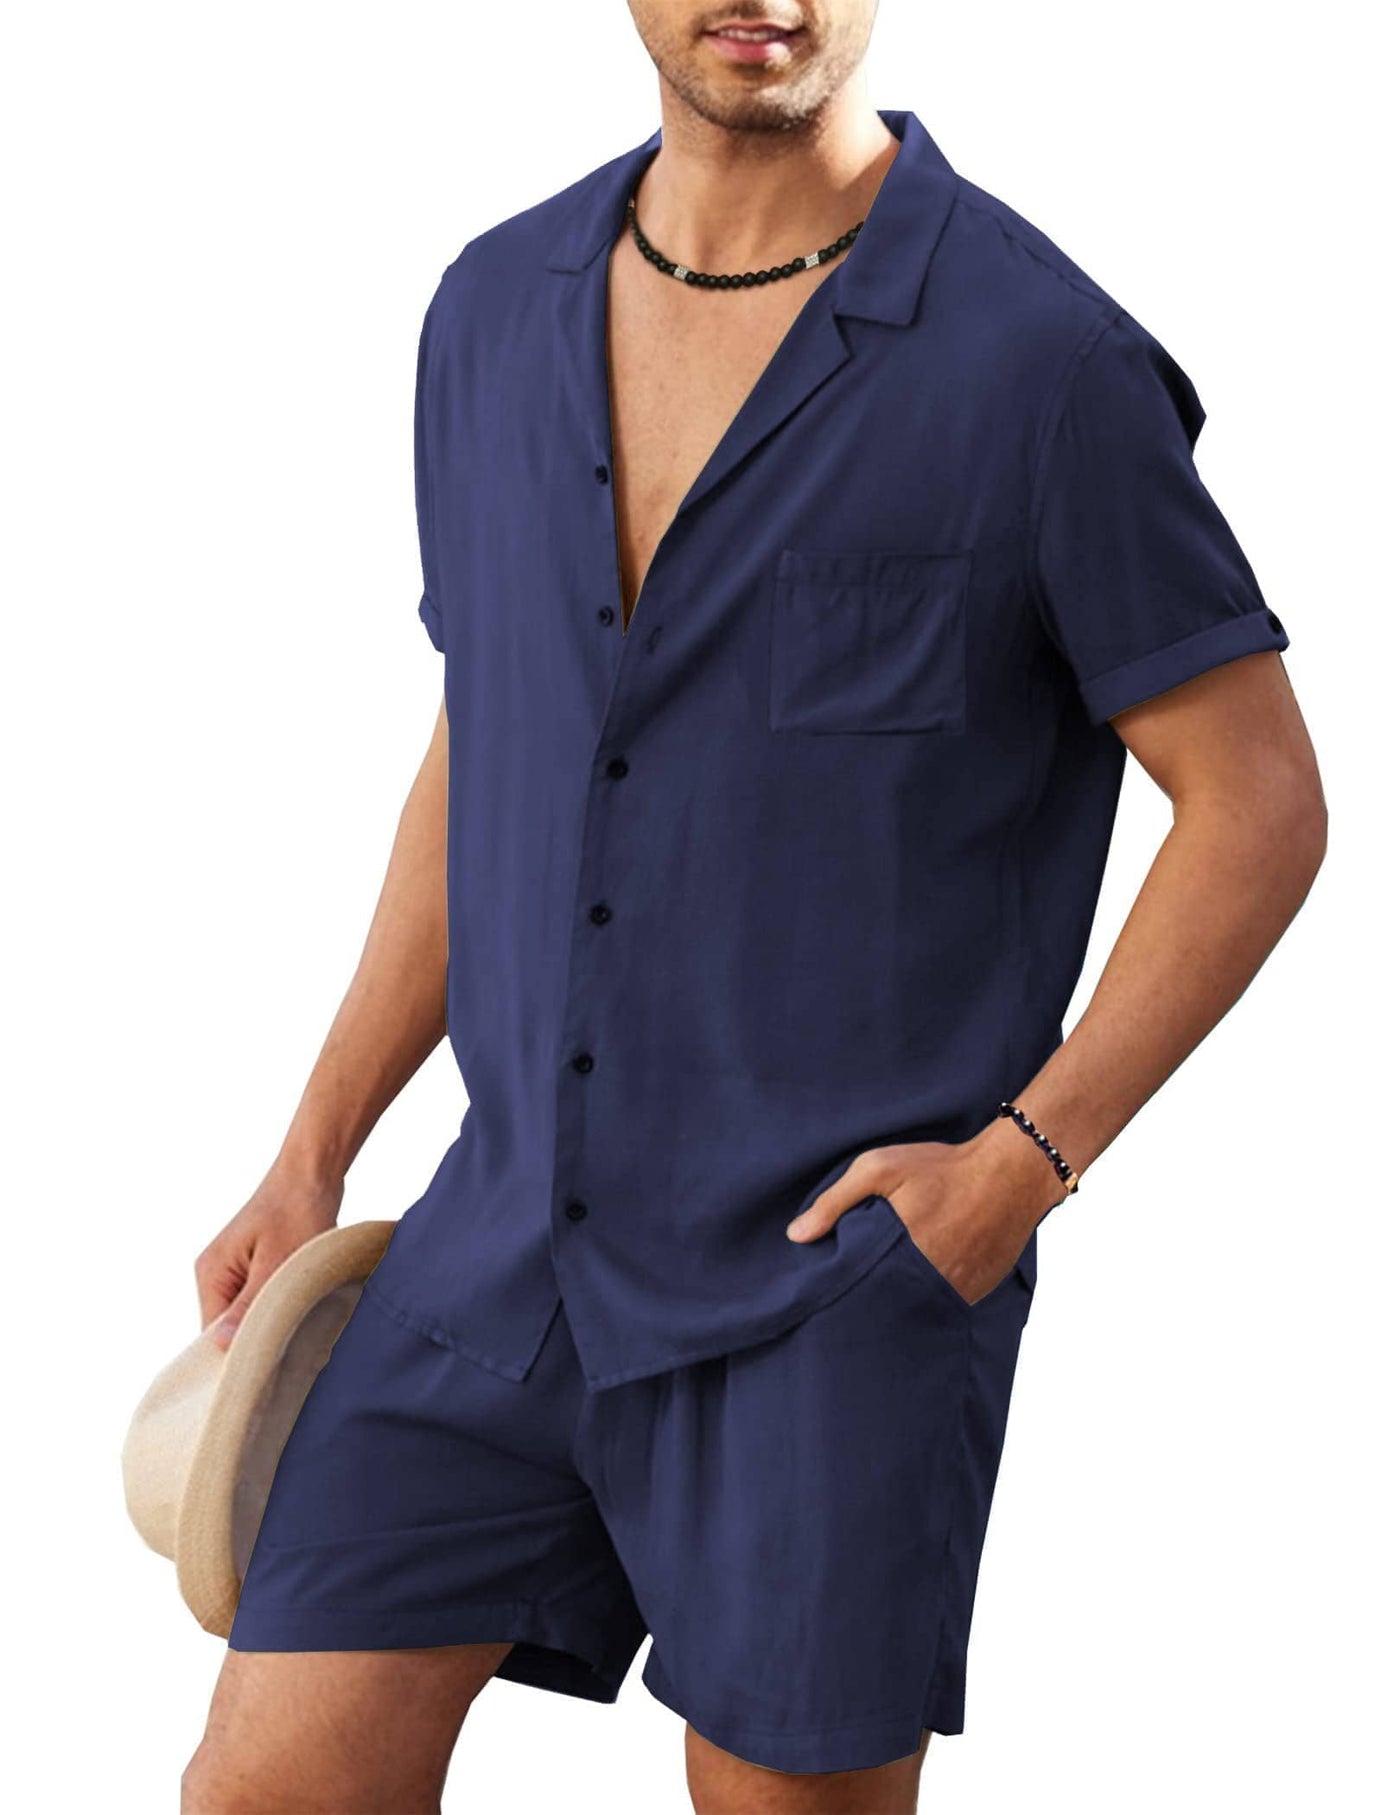 Coofandy 2 Pieces Beach Shirt Set (US Only) Sets coofandy Navy Blue S 